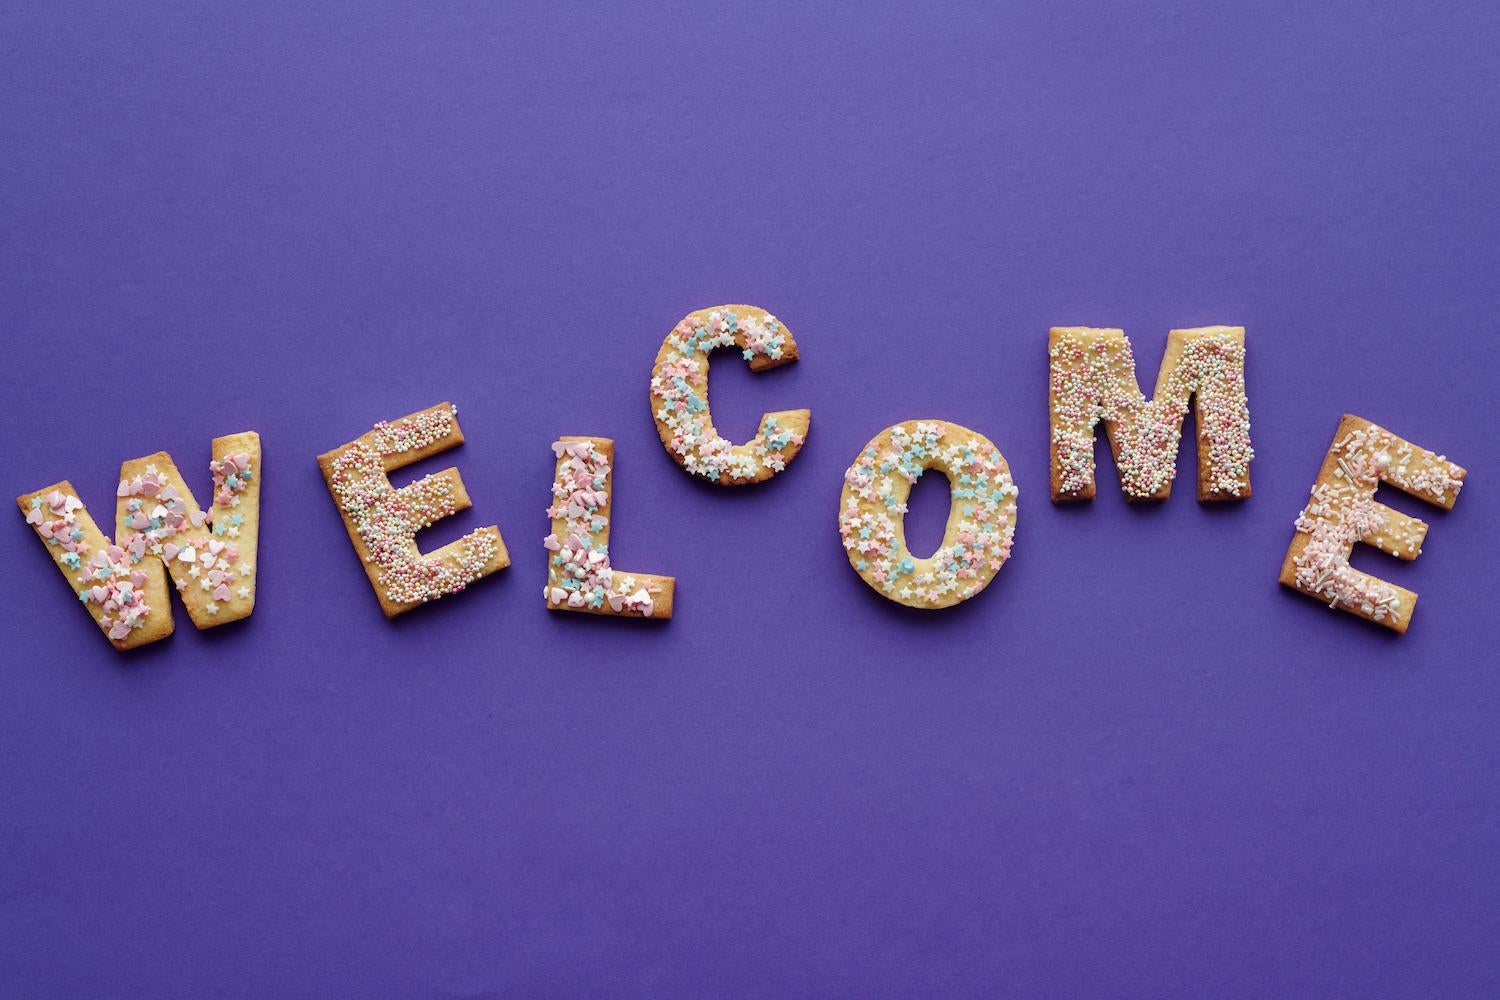 How To Welcome a New Employee To The Team